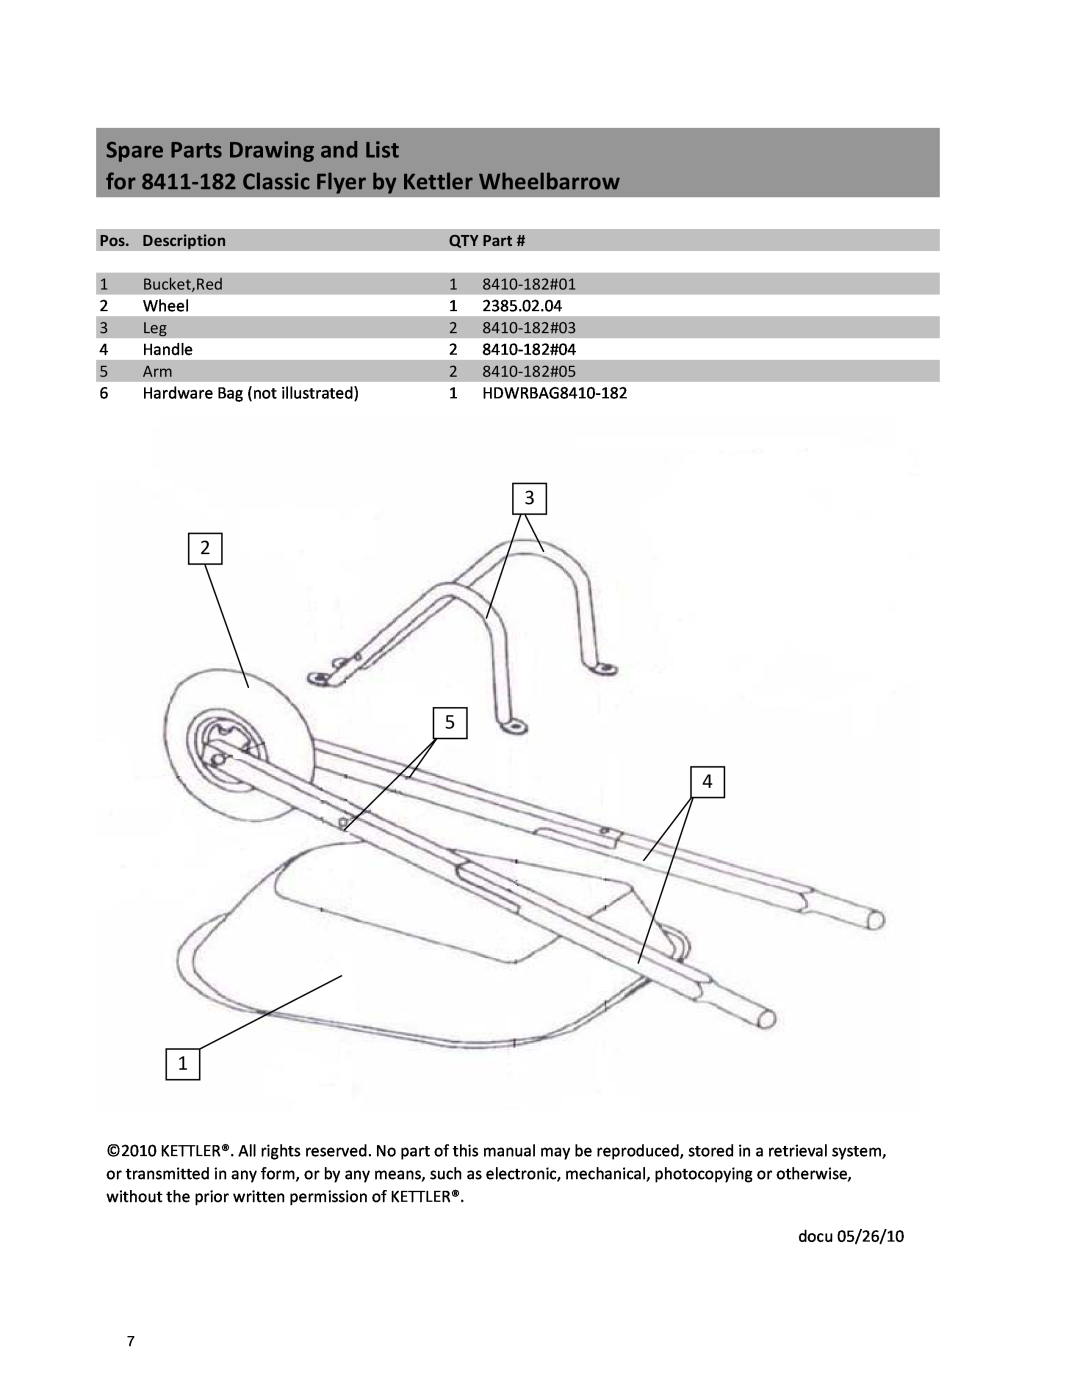 Kettler 8411-182 manual Description, Spare Parts Drawing and List, for 8411‐182 Classic Flyer by Kettler Wheelbarrow 